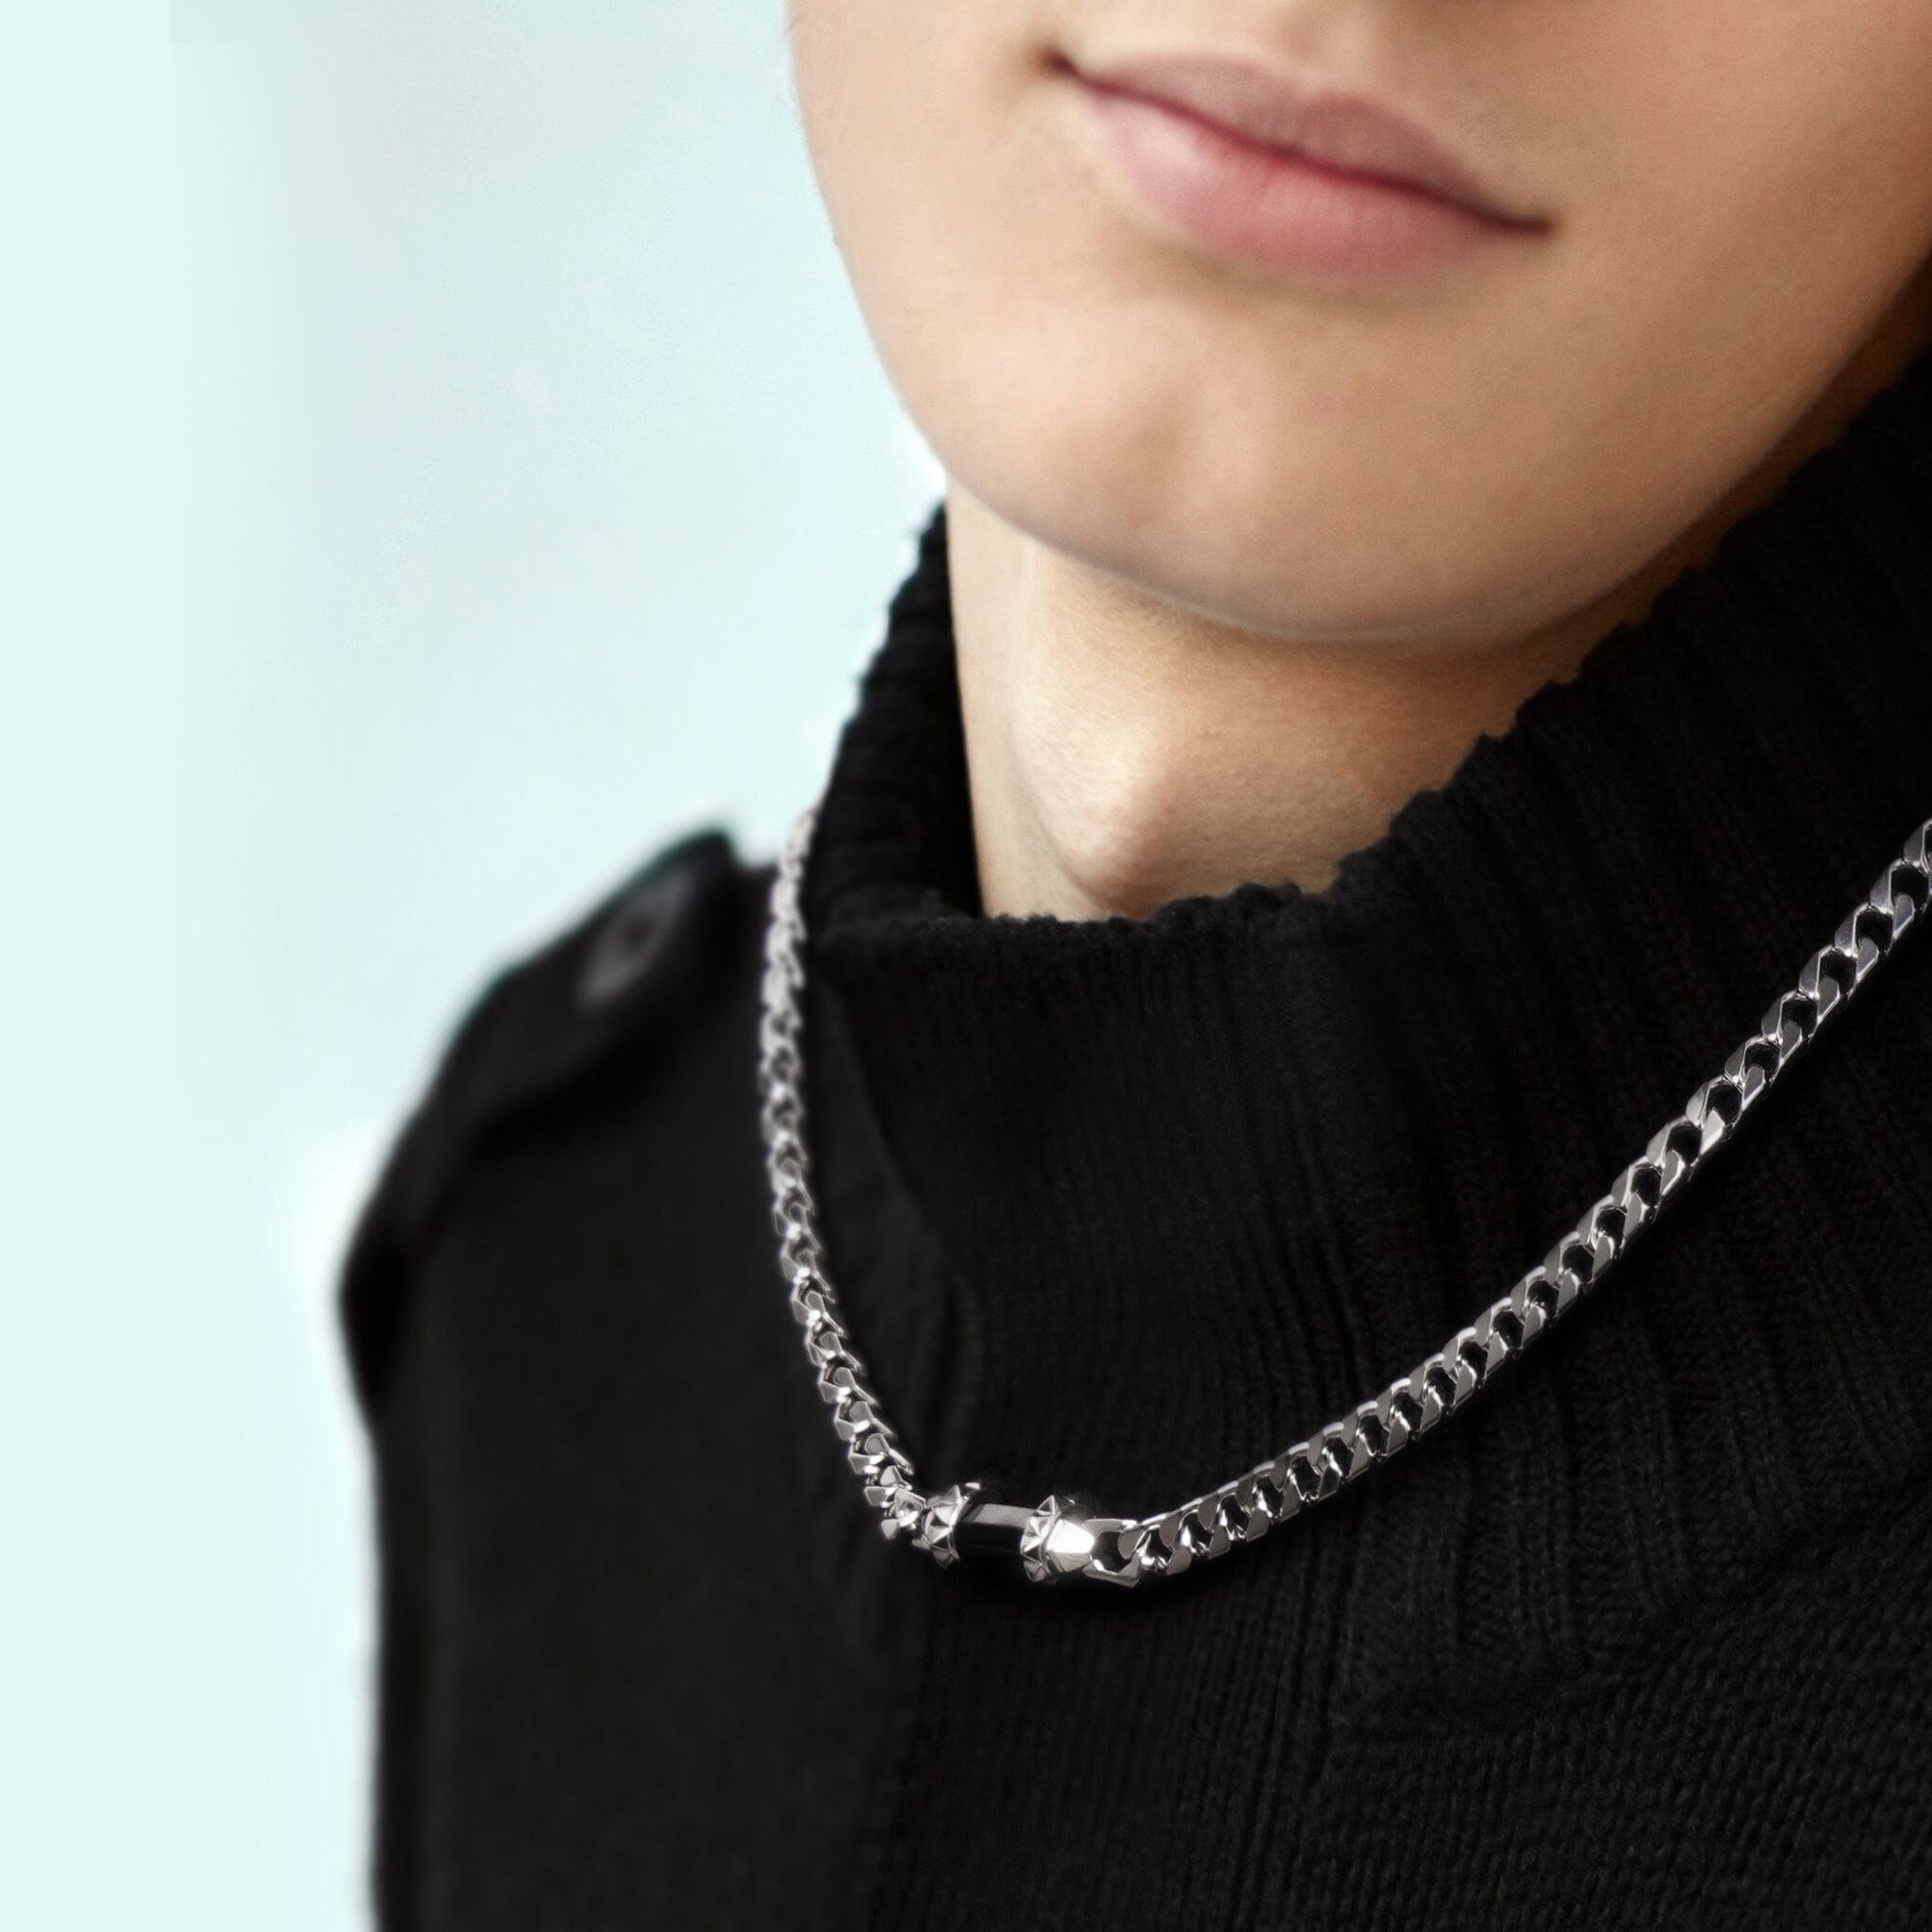 Men's Fantasy Silver Chain Necklace with Black Rutilated Quartz Necklaces WAA FASHION GROUP 